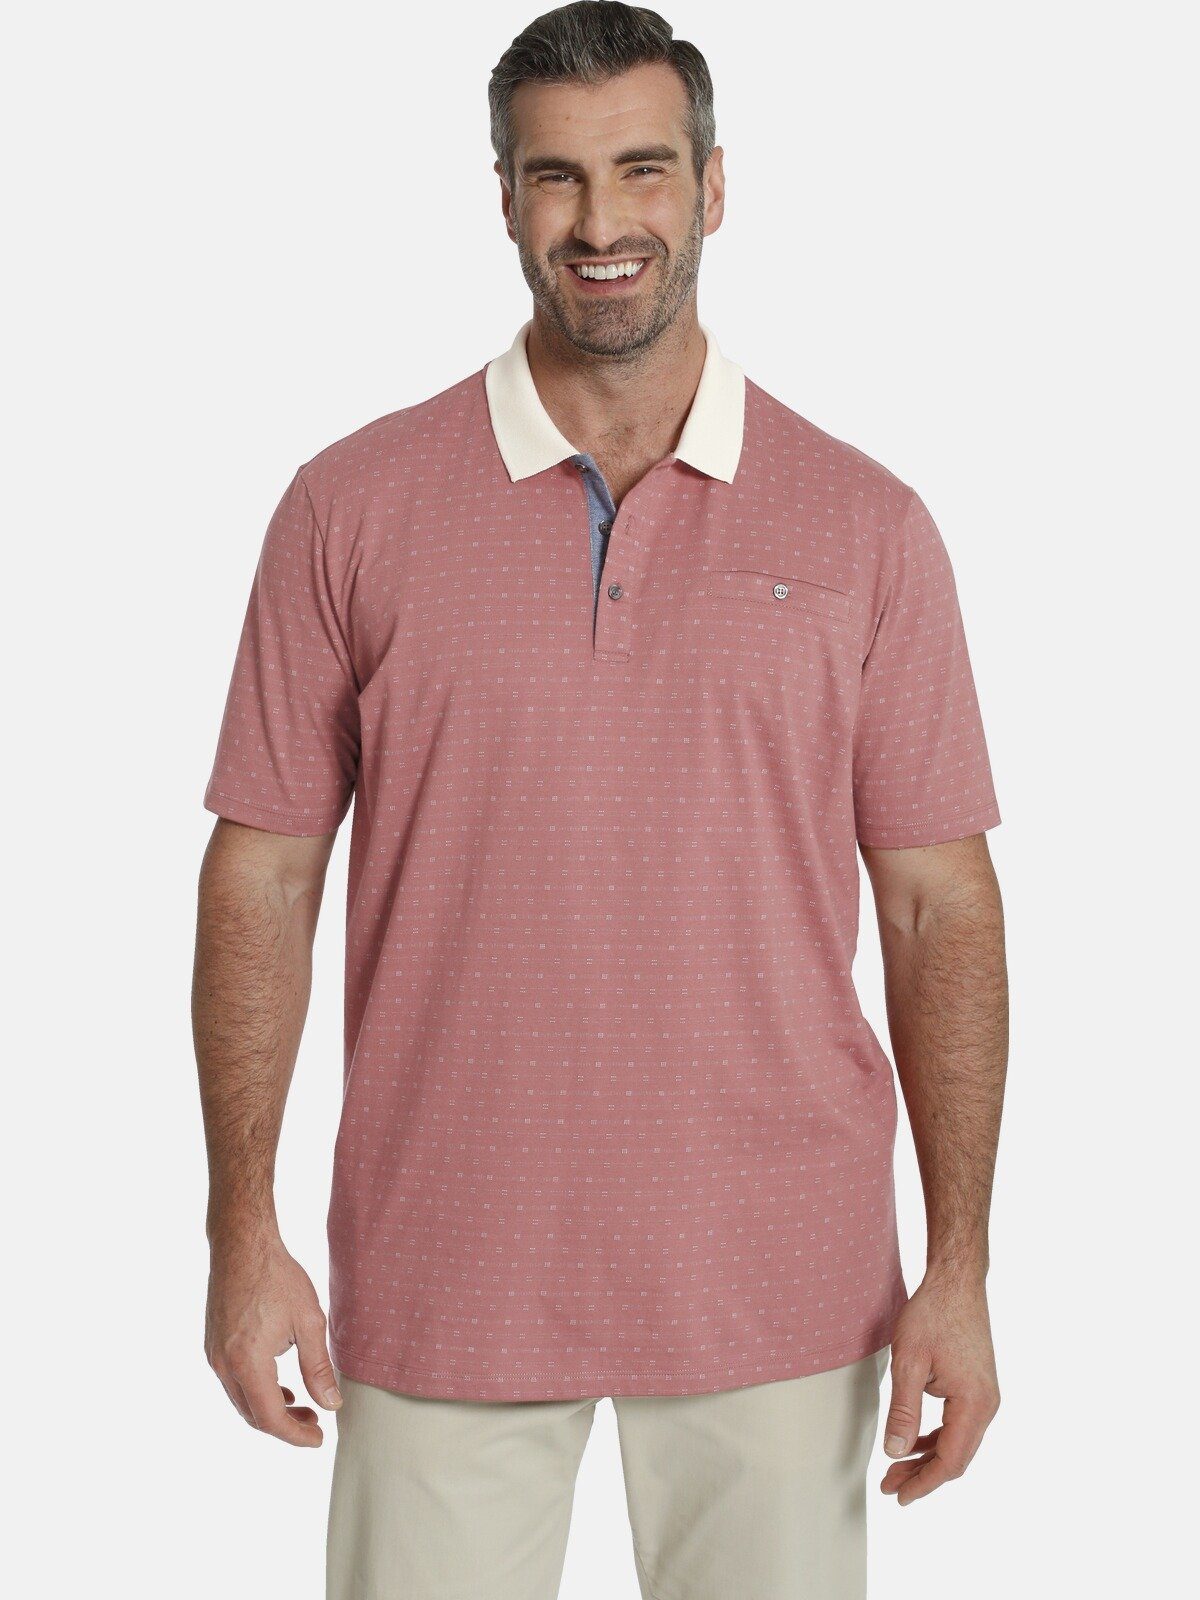 Charles Colby Poloshirt EARL bequeme Retro-Stil Passform MIKE